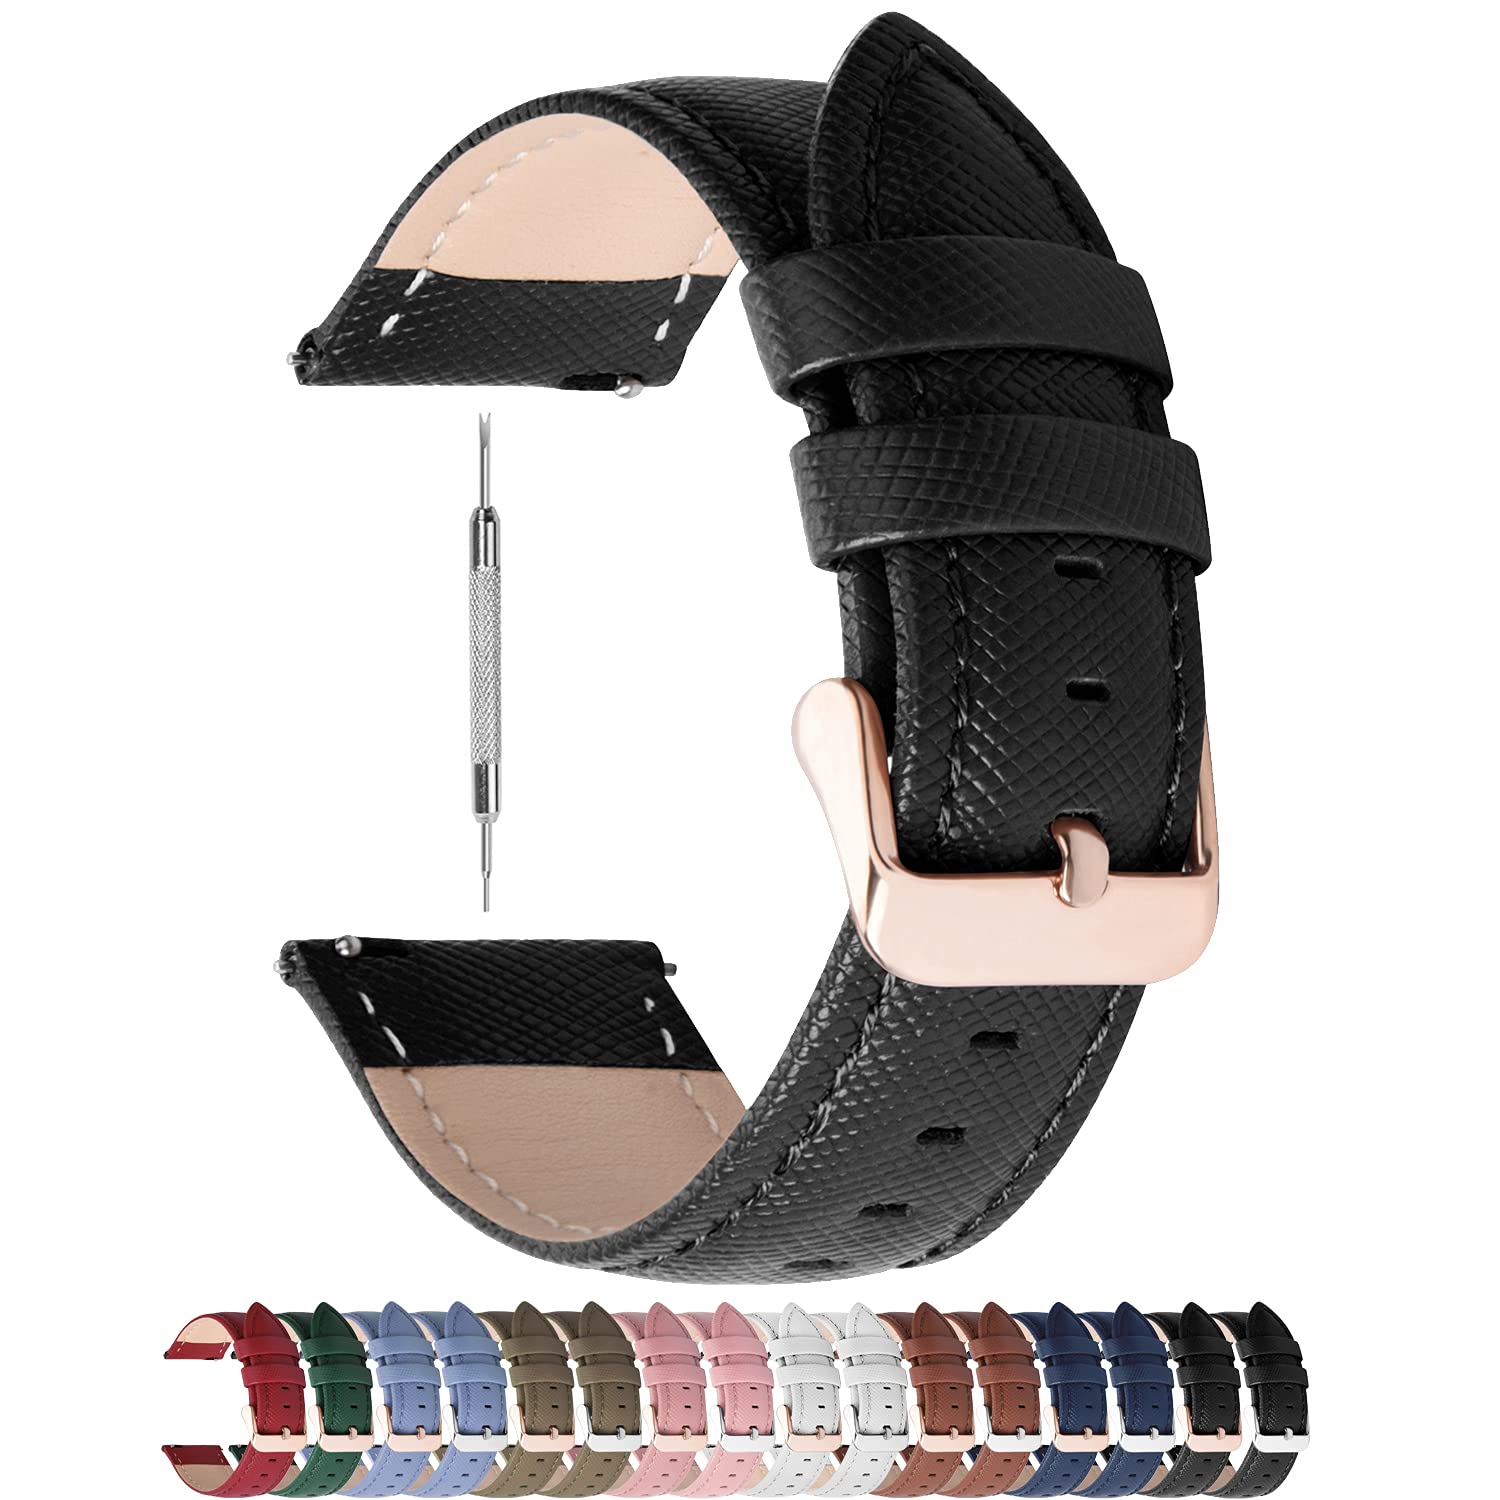 Fullmosa Cross Genuine Leather Watch Band 14mm 16mm 18mm 20mm 22mm 24mm, Quick Release Strap for Men and Women, Fits Samsung Galaxy Watch 5/4/3,Garmin Watch,Huawei,Fossil,Seiko,Citizen,Ticwatch